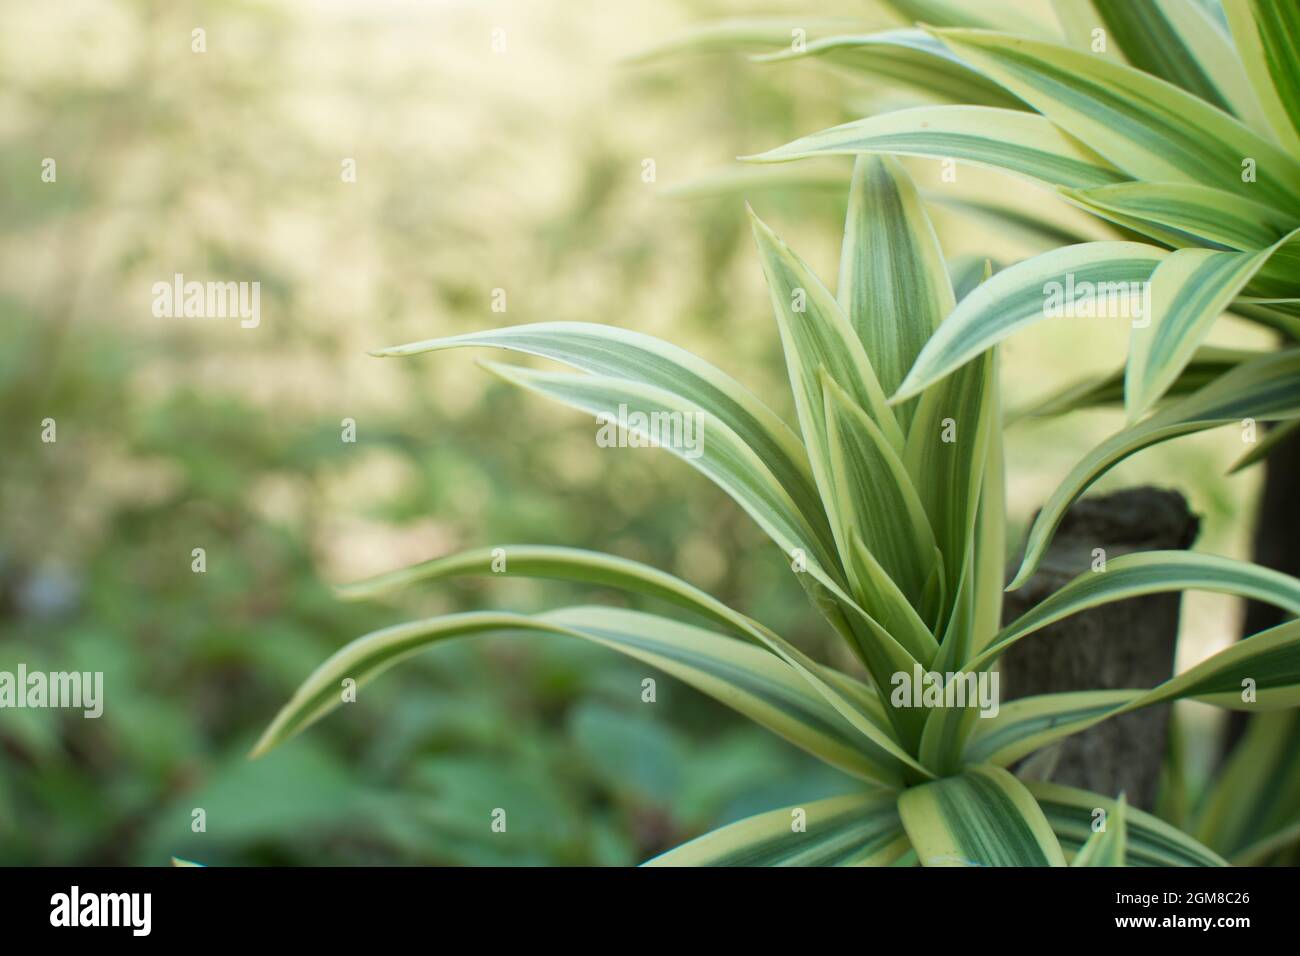 Dracaena green leaves close up for background. Stock Photo